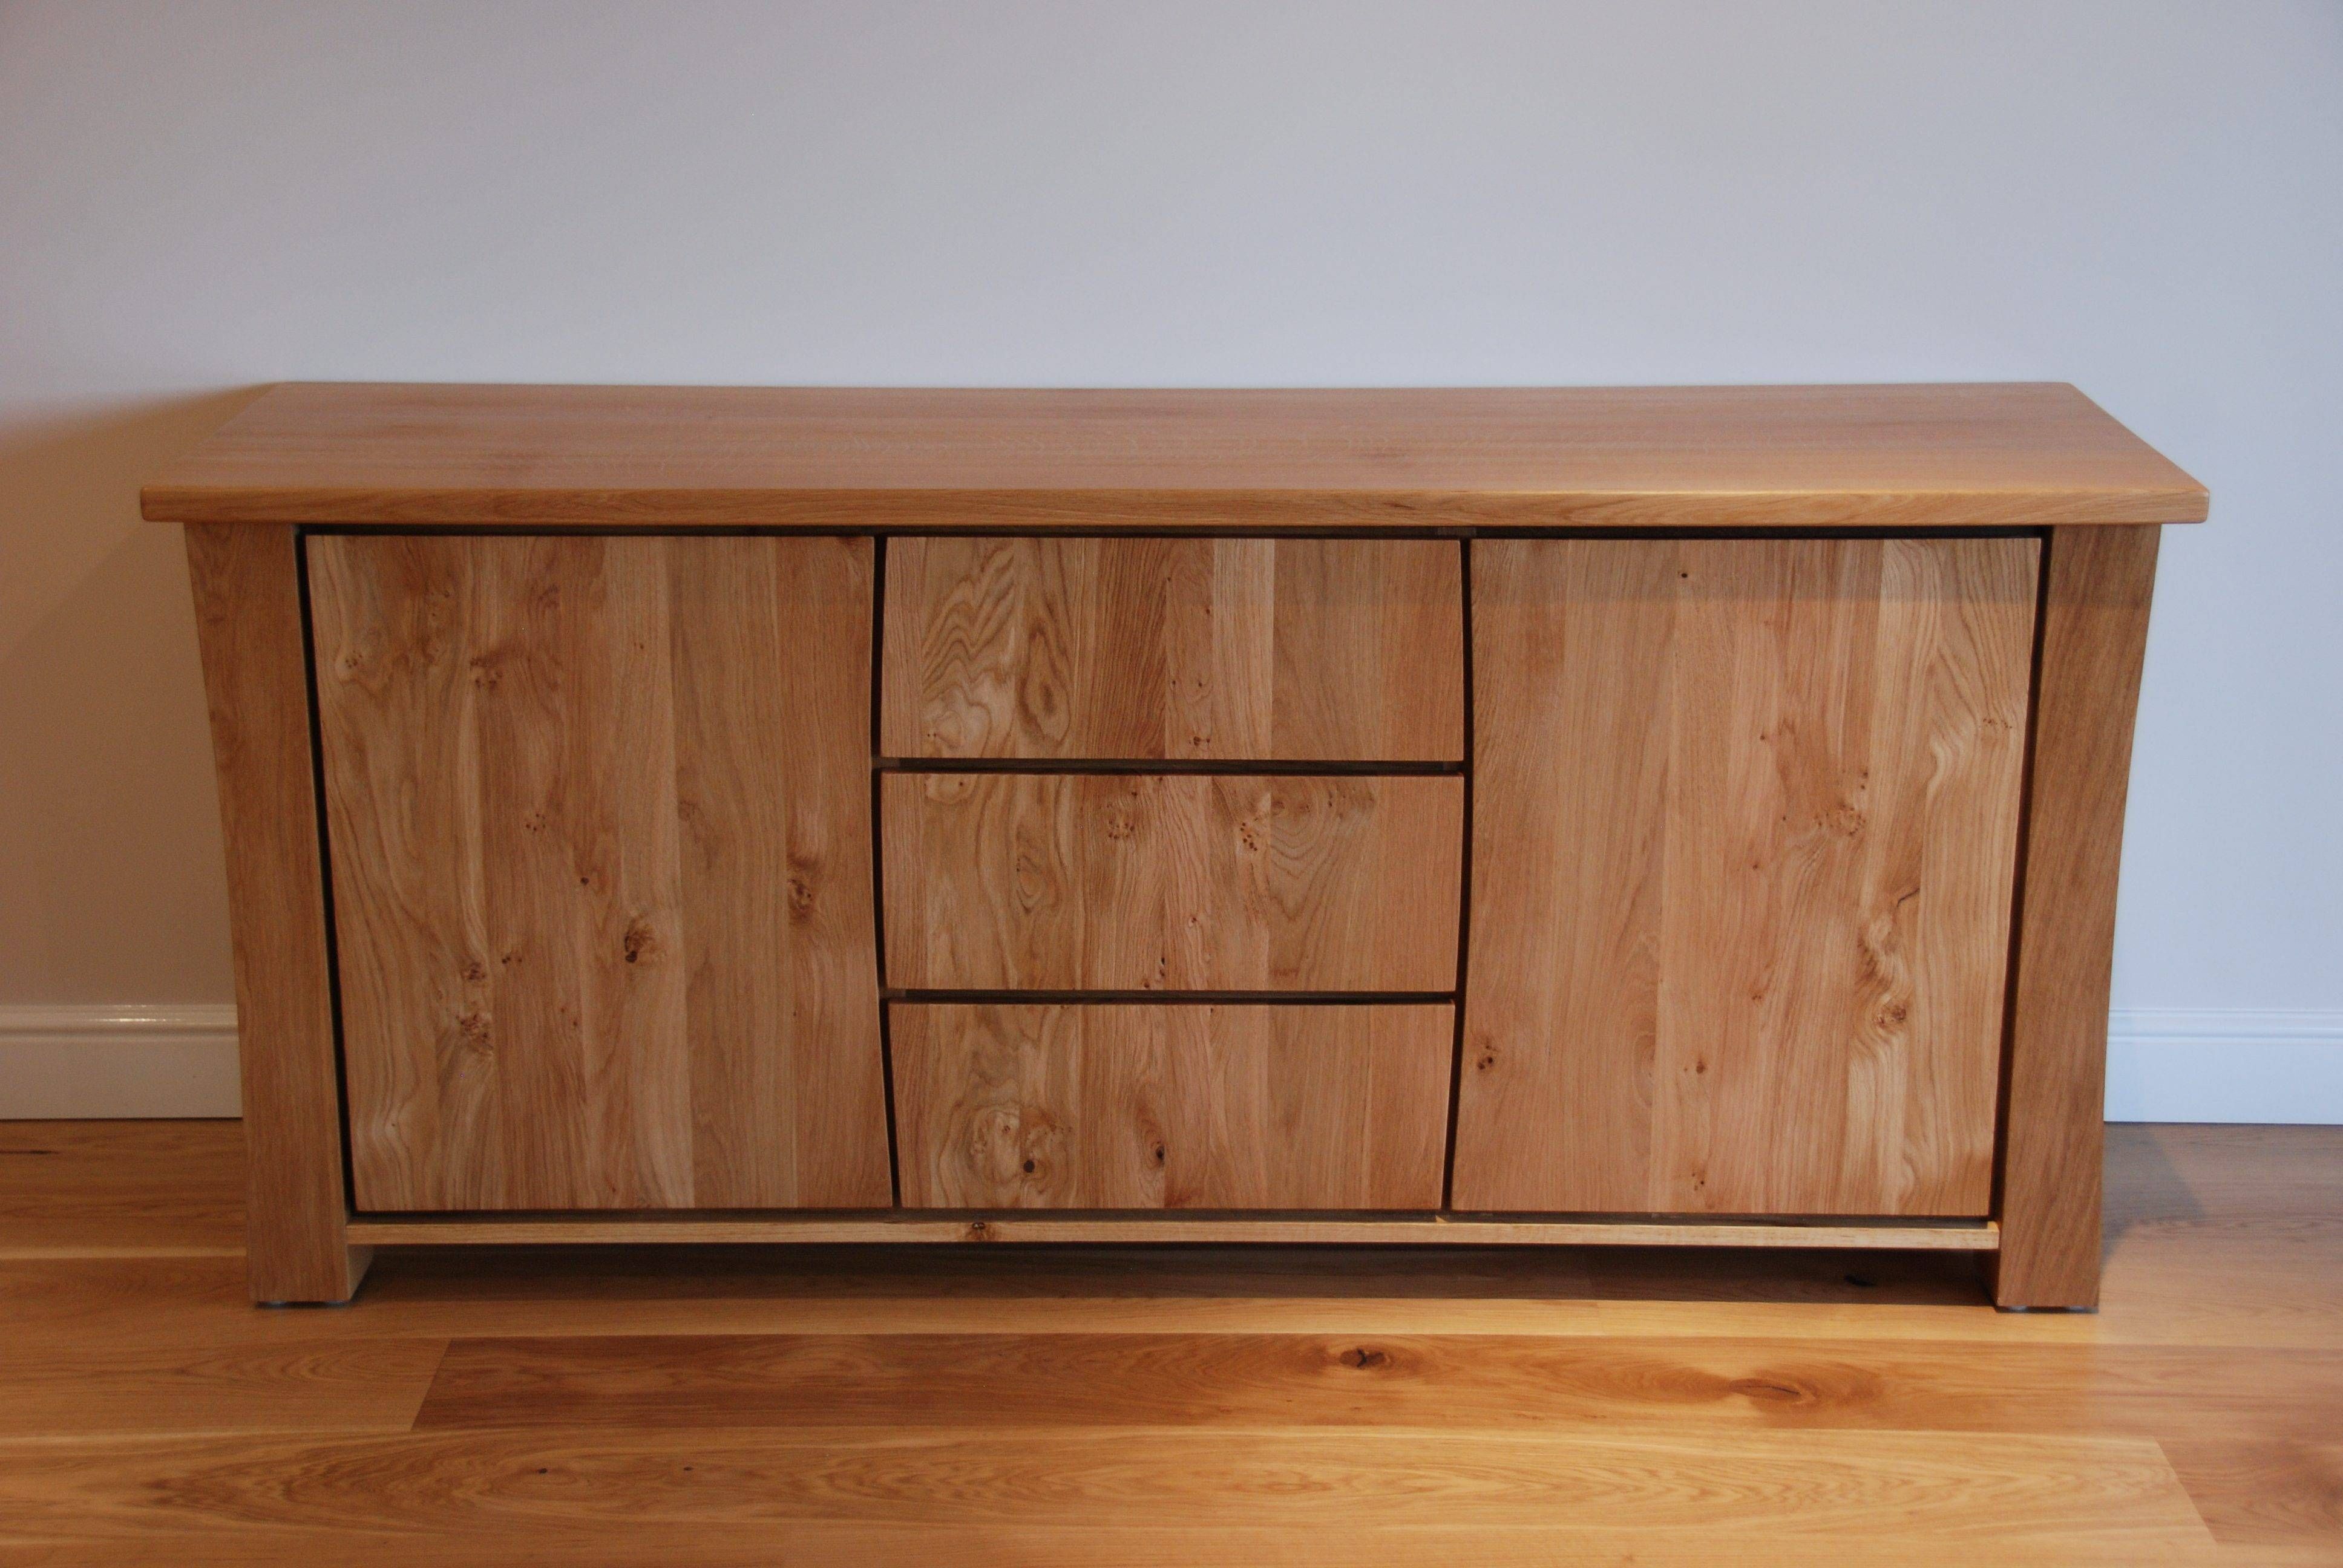 Sideboard And Tv Unit Commission | Bespokegreenoak With Regard To Sideboard Units (Photo 4 of 30)